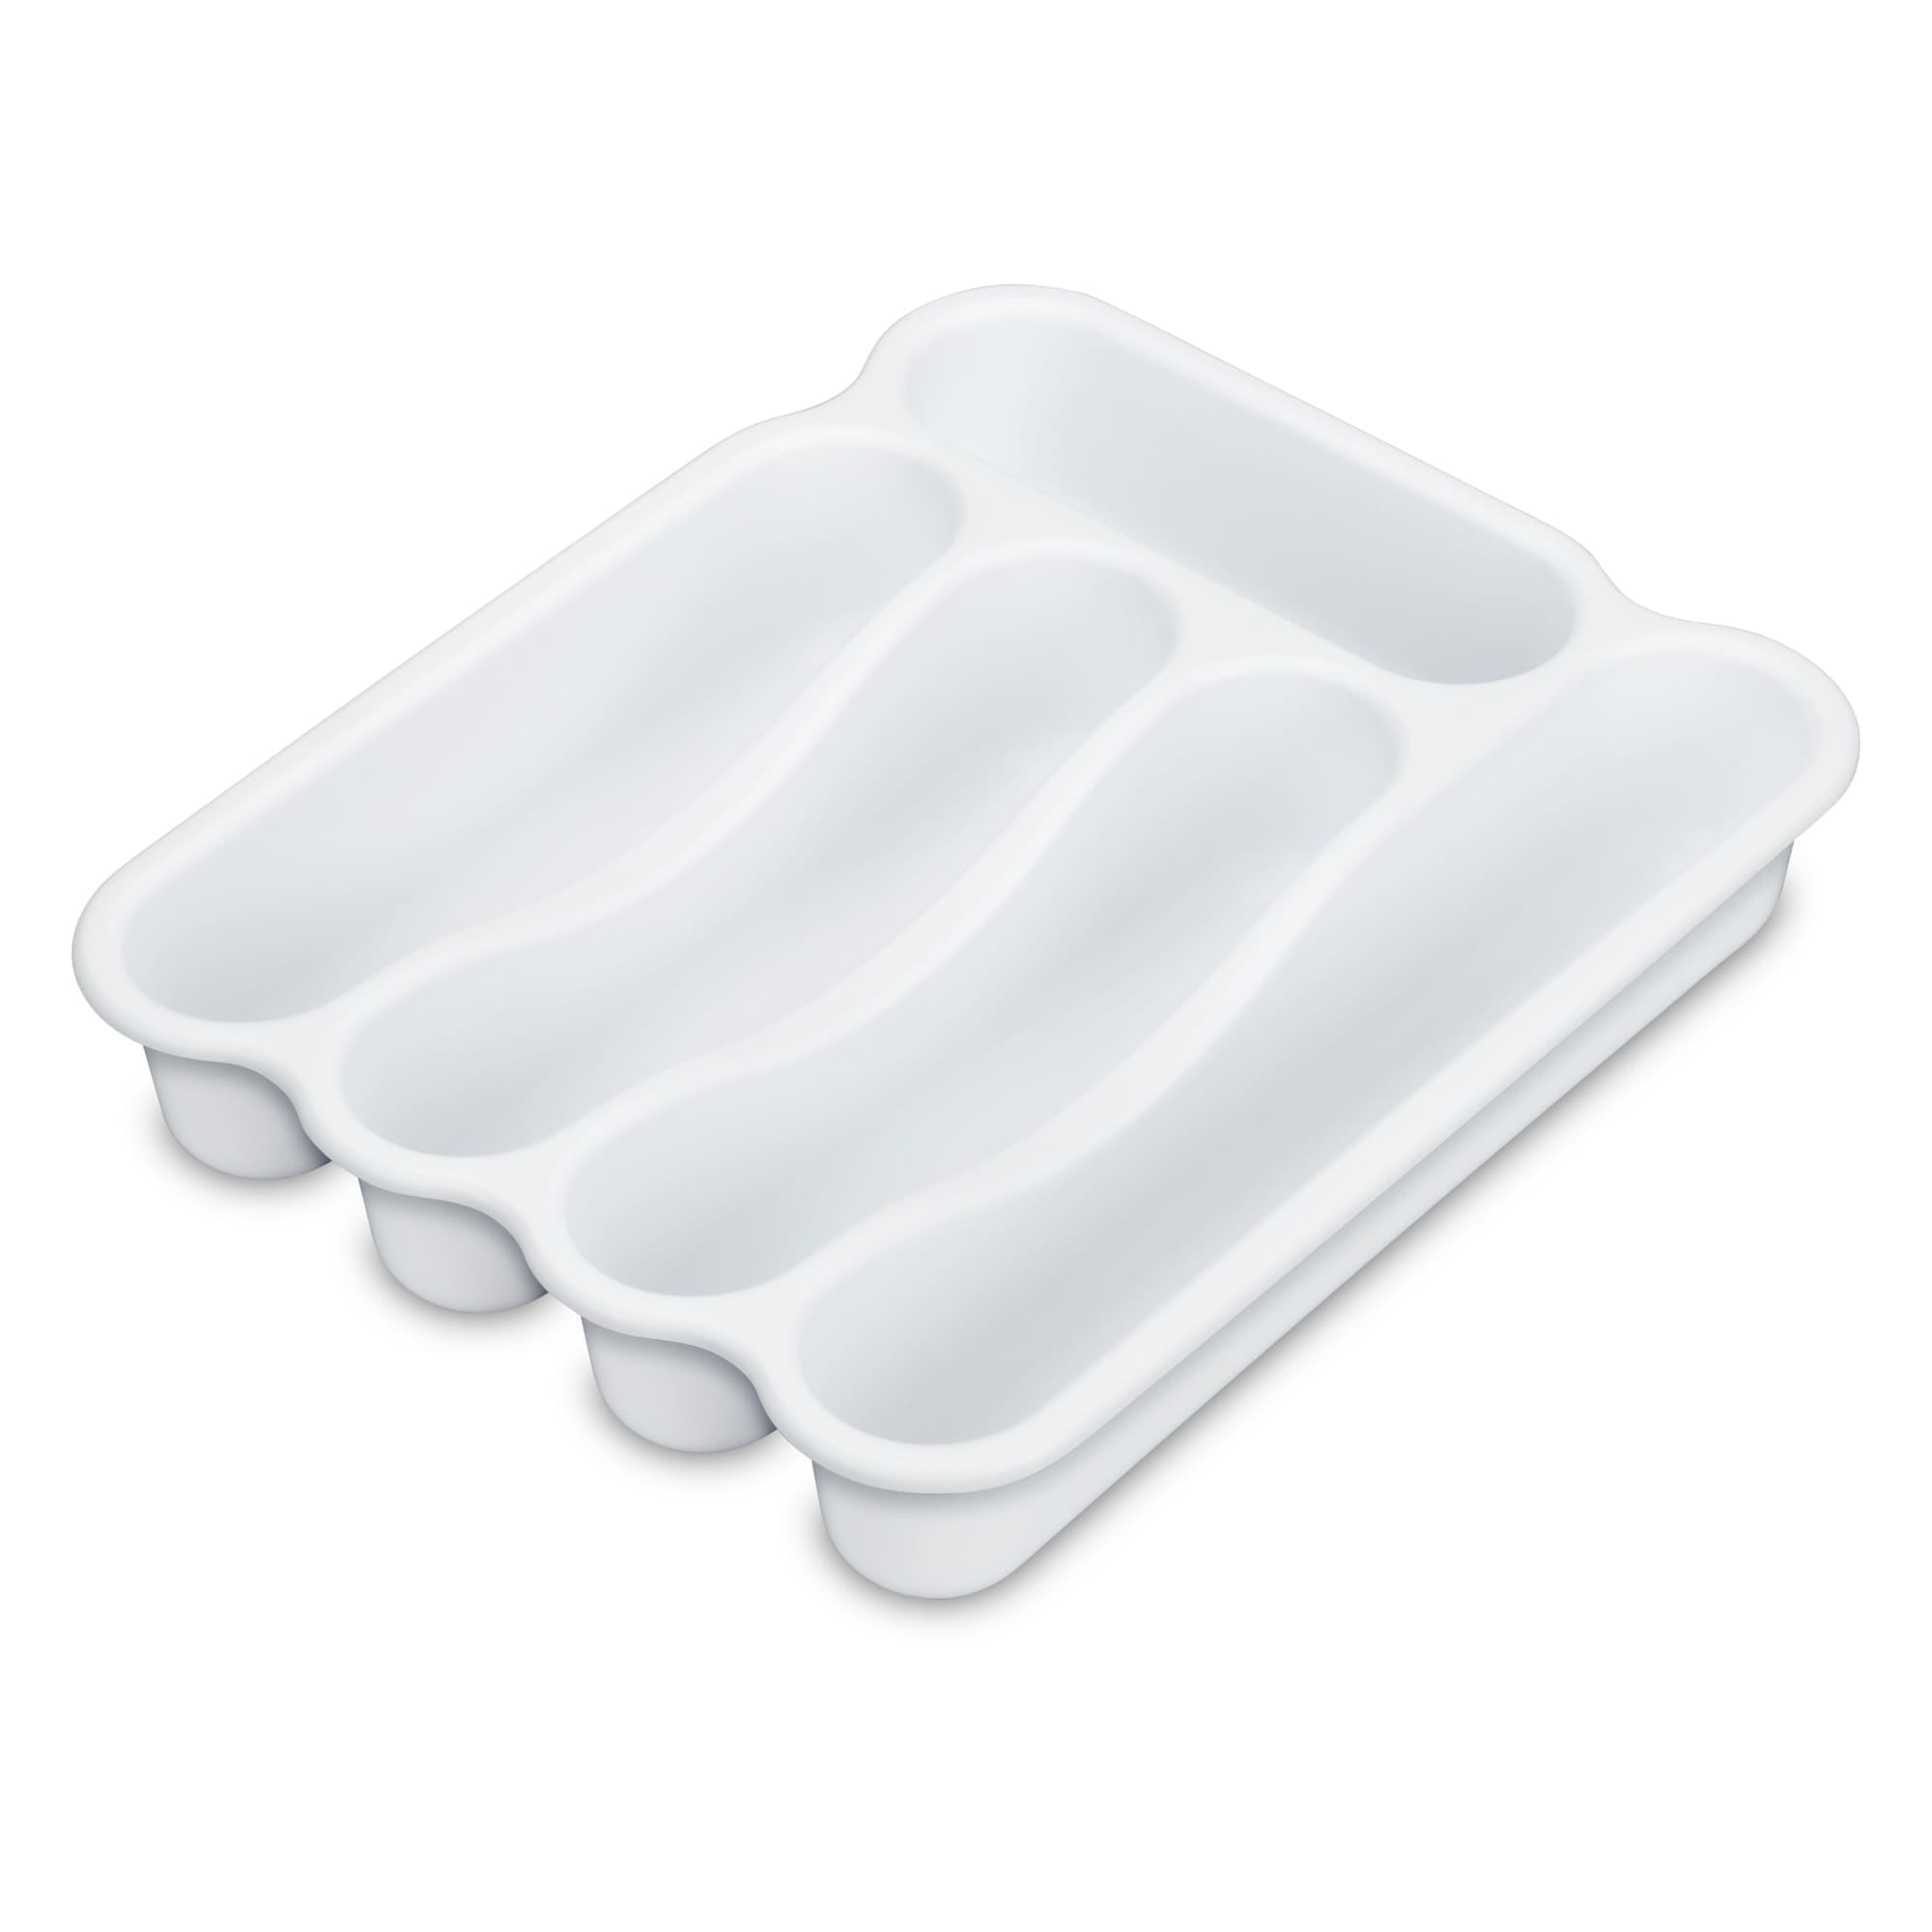 Sterilite 5 Compartment Cutlery Tray $4.00 EACH, CASE PACK OF 6